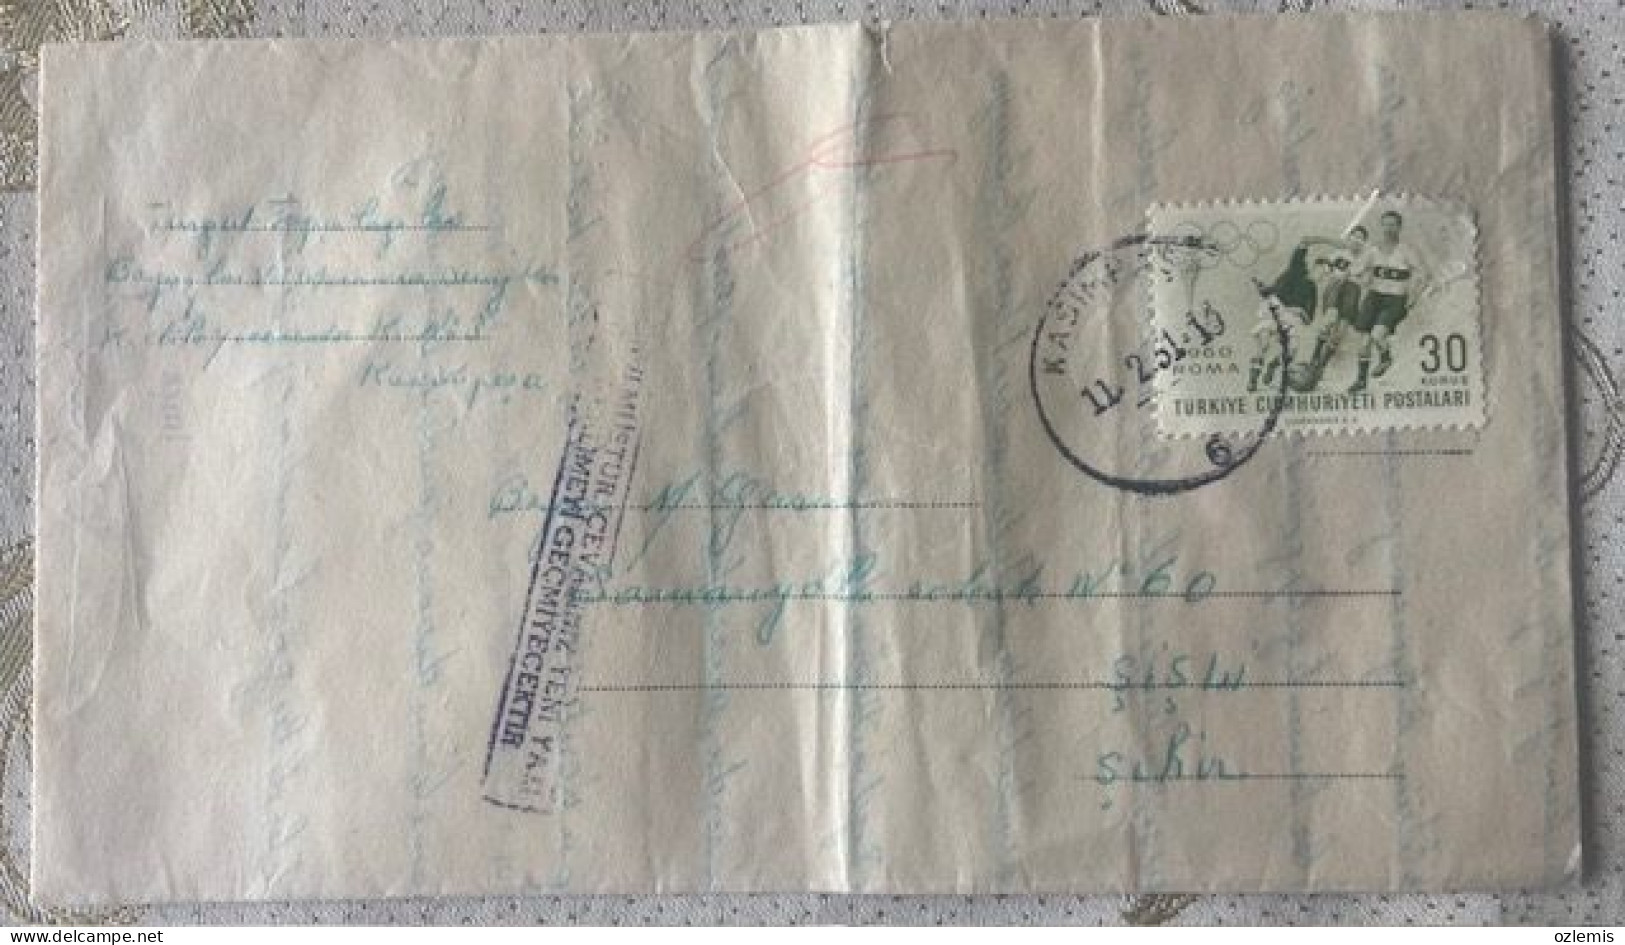 TURKEY,TURKEI,TURQUIE , ISTANBUL,TO ISTANBUL .1961,SOLIDER MAIL,  COVER - Covers & Documents